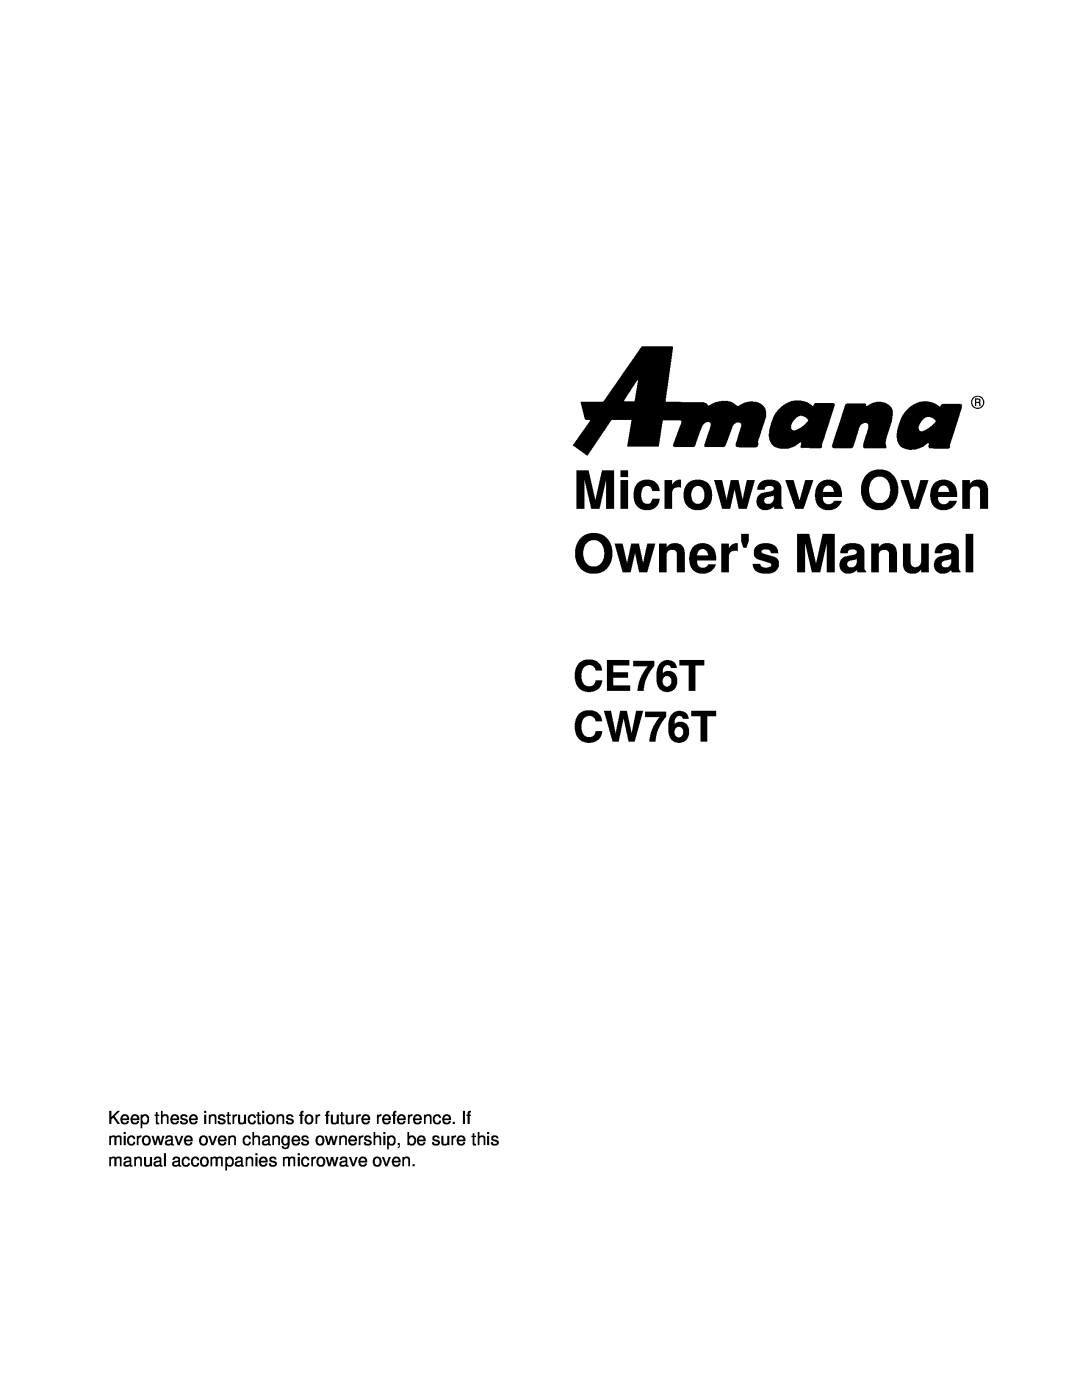 Amana owner manual CE76T CW76T 